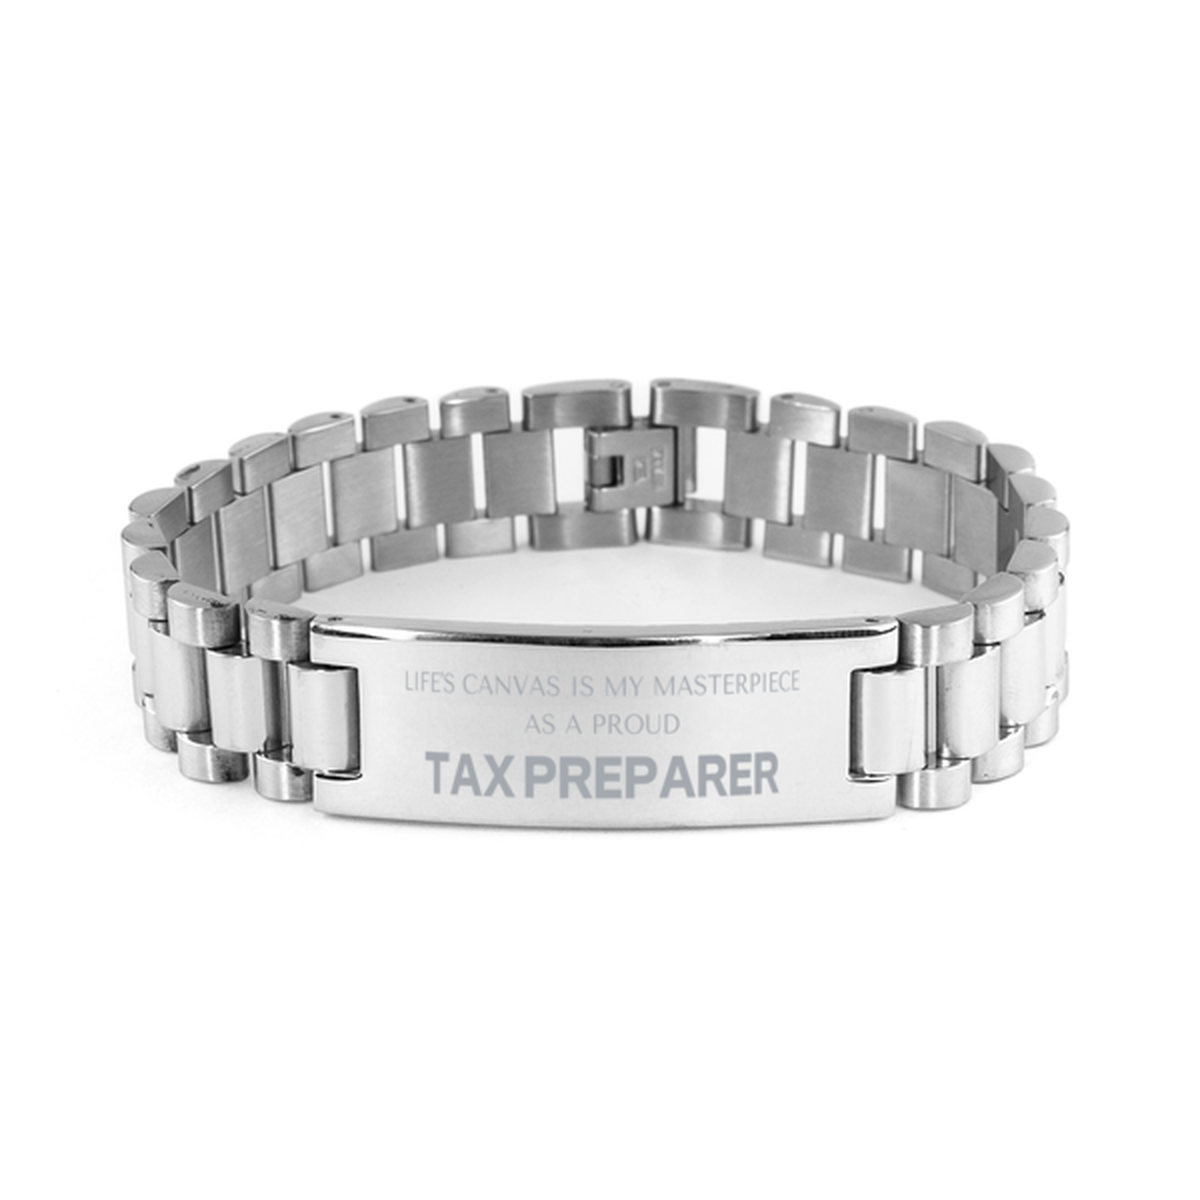 Proud Tax Preparer Gifts, Life's canvas is my masterpiece, Epic Birthday Christmas Unique Ladder Stainless Steel Bracelet For Tax Preparer, Coworkers, Men, Women, Friends